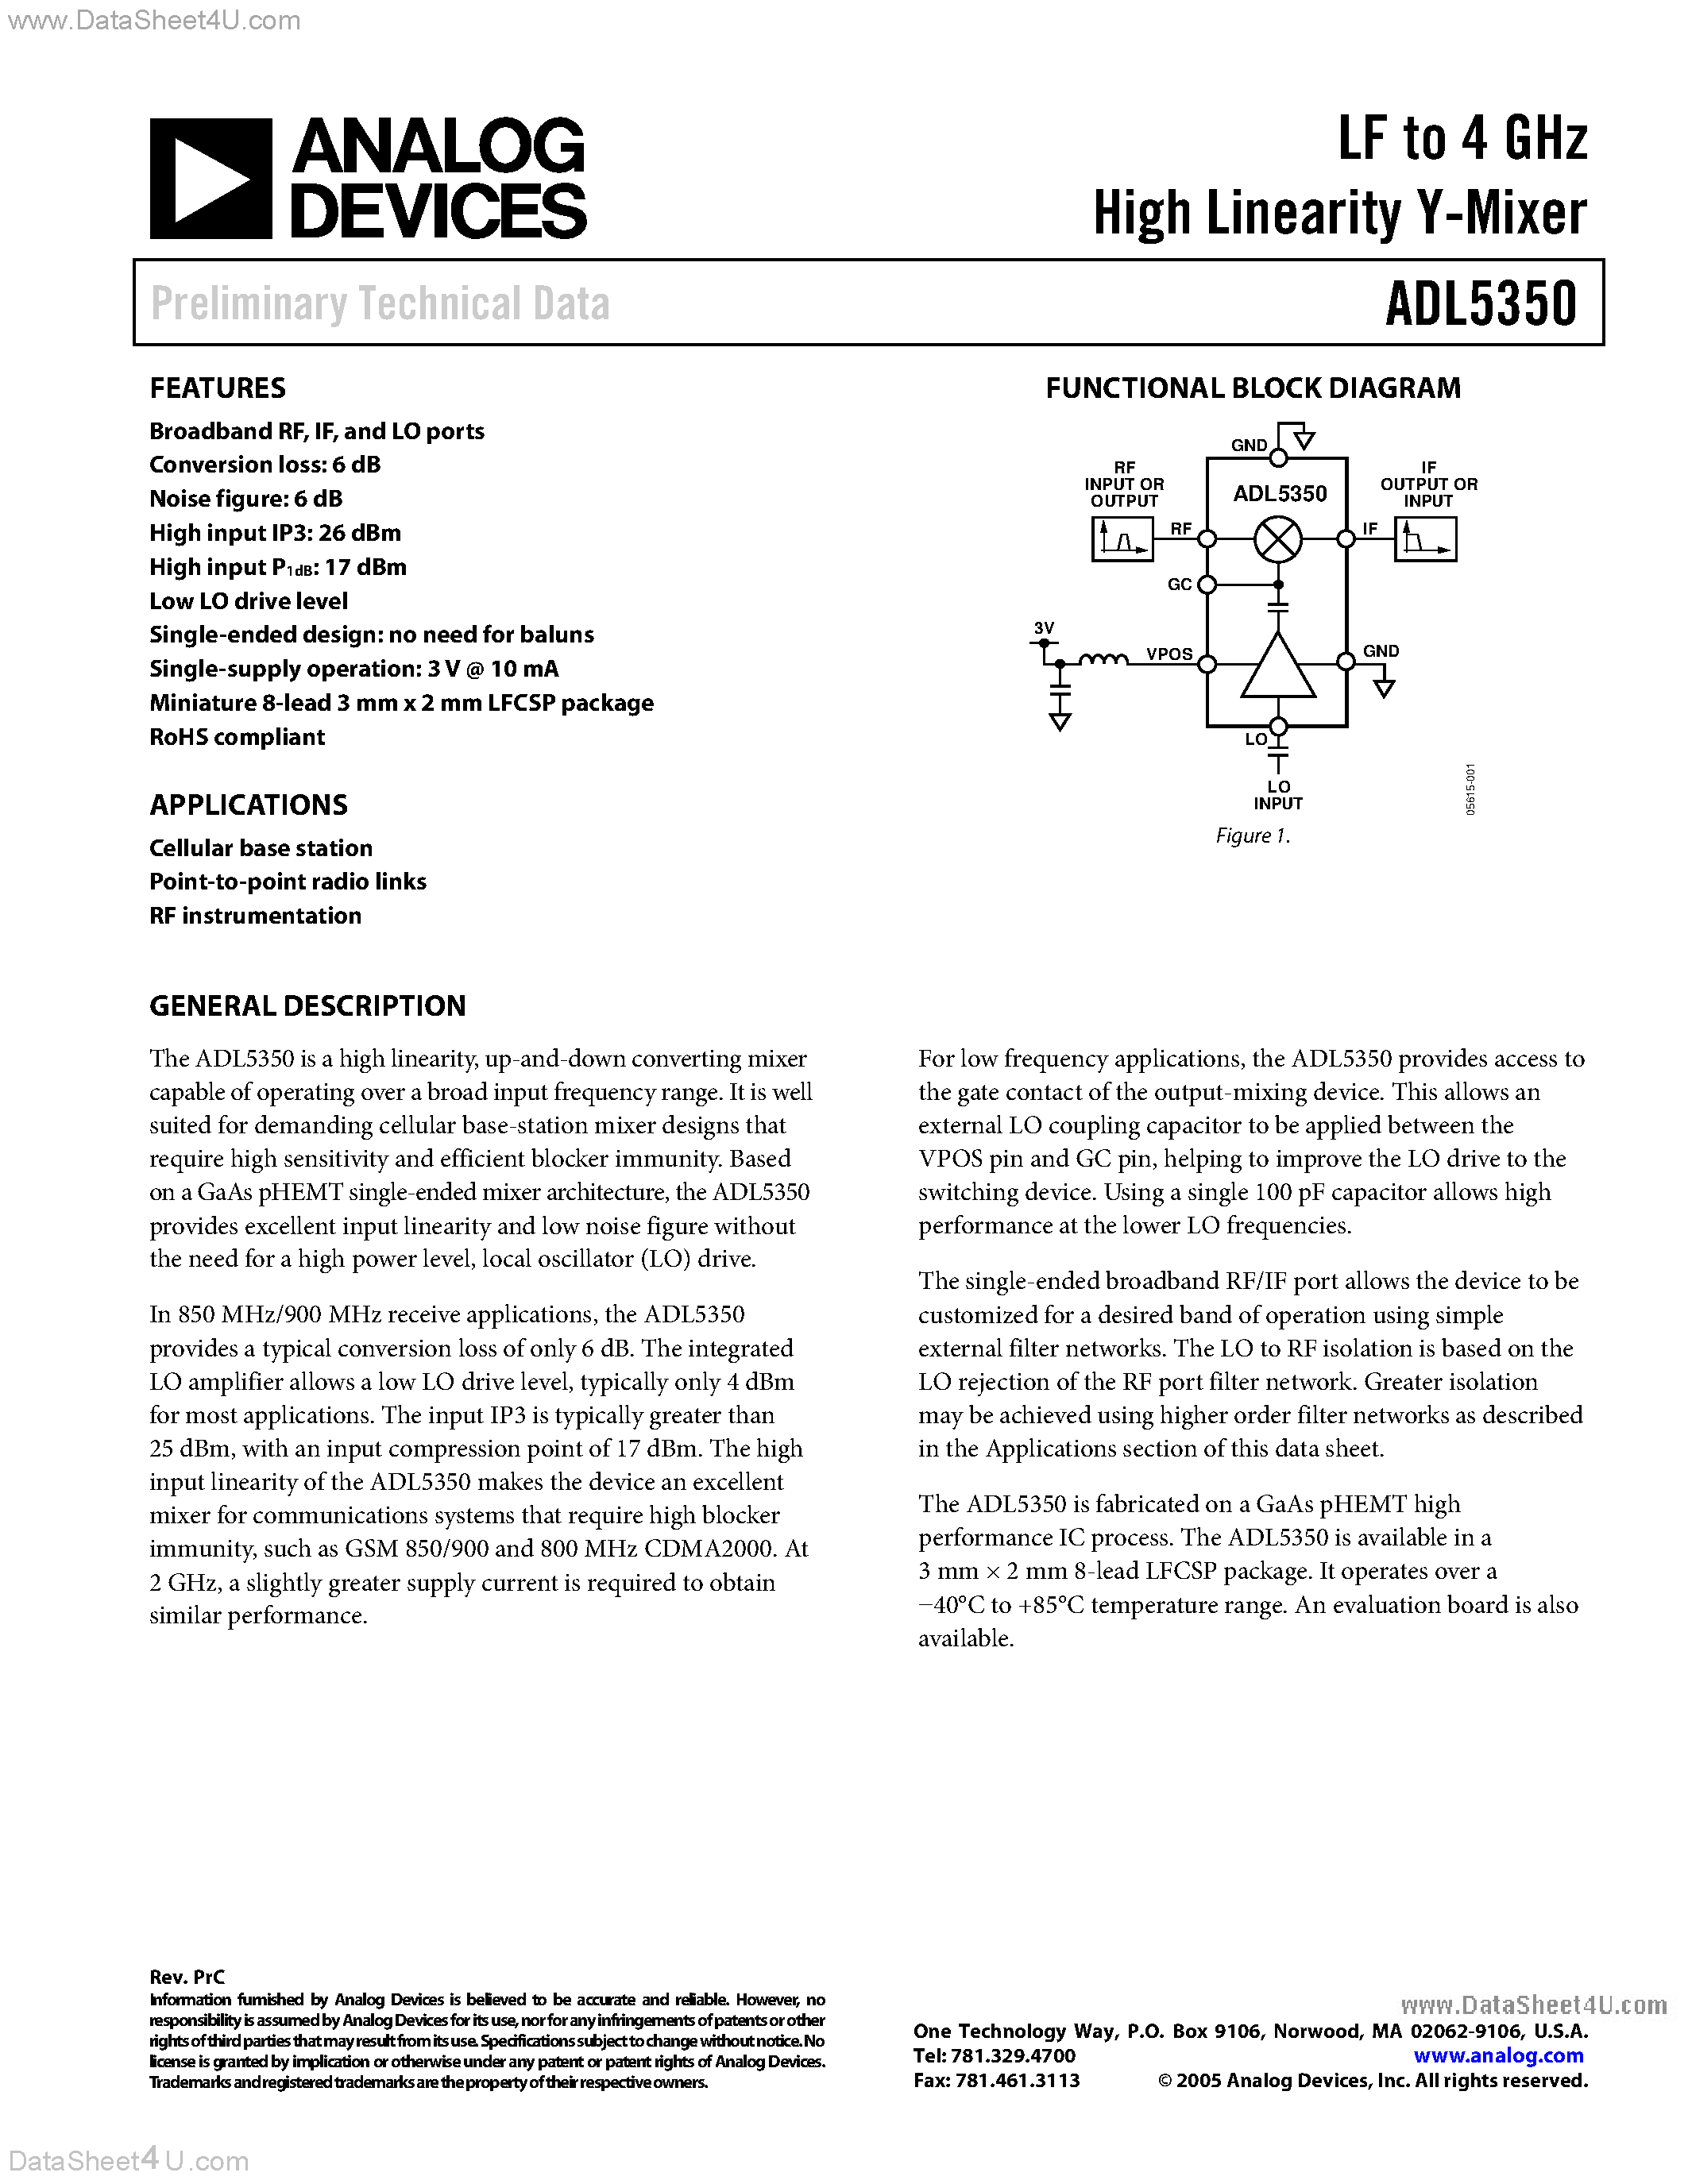 Даташит ADL5350 - LF to 4 GHz High Linearity Y-Mixer страница 1